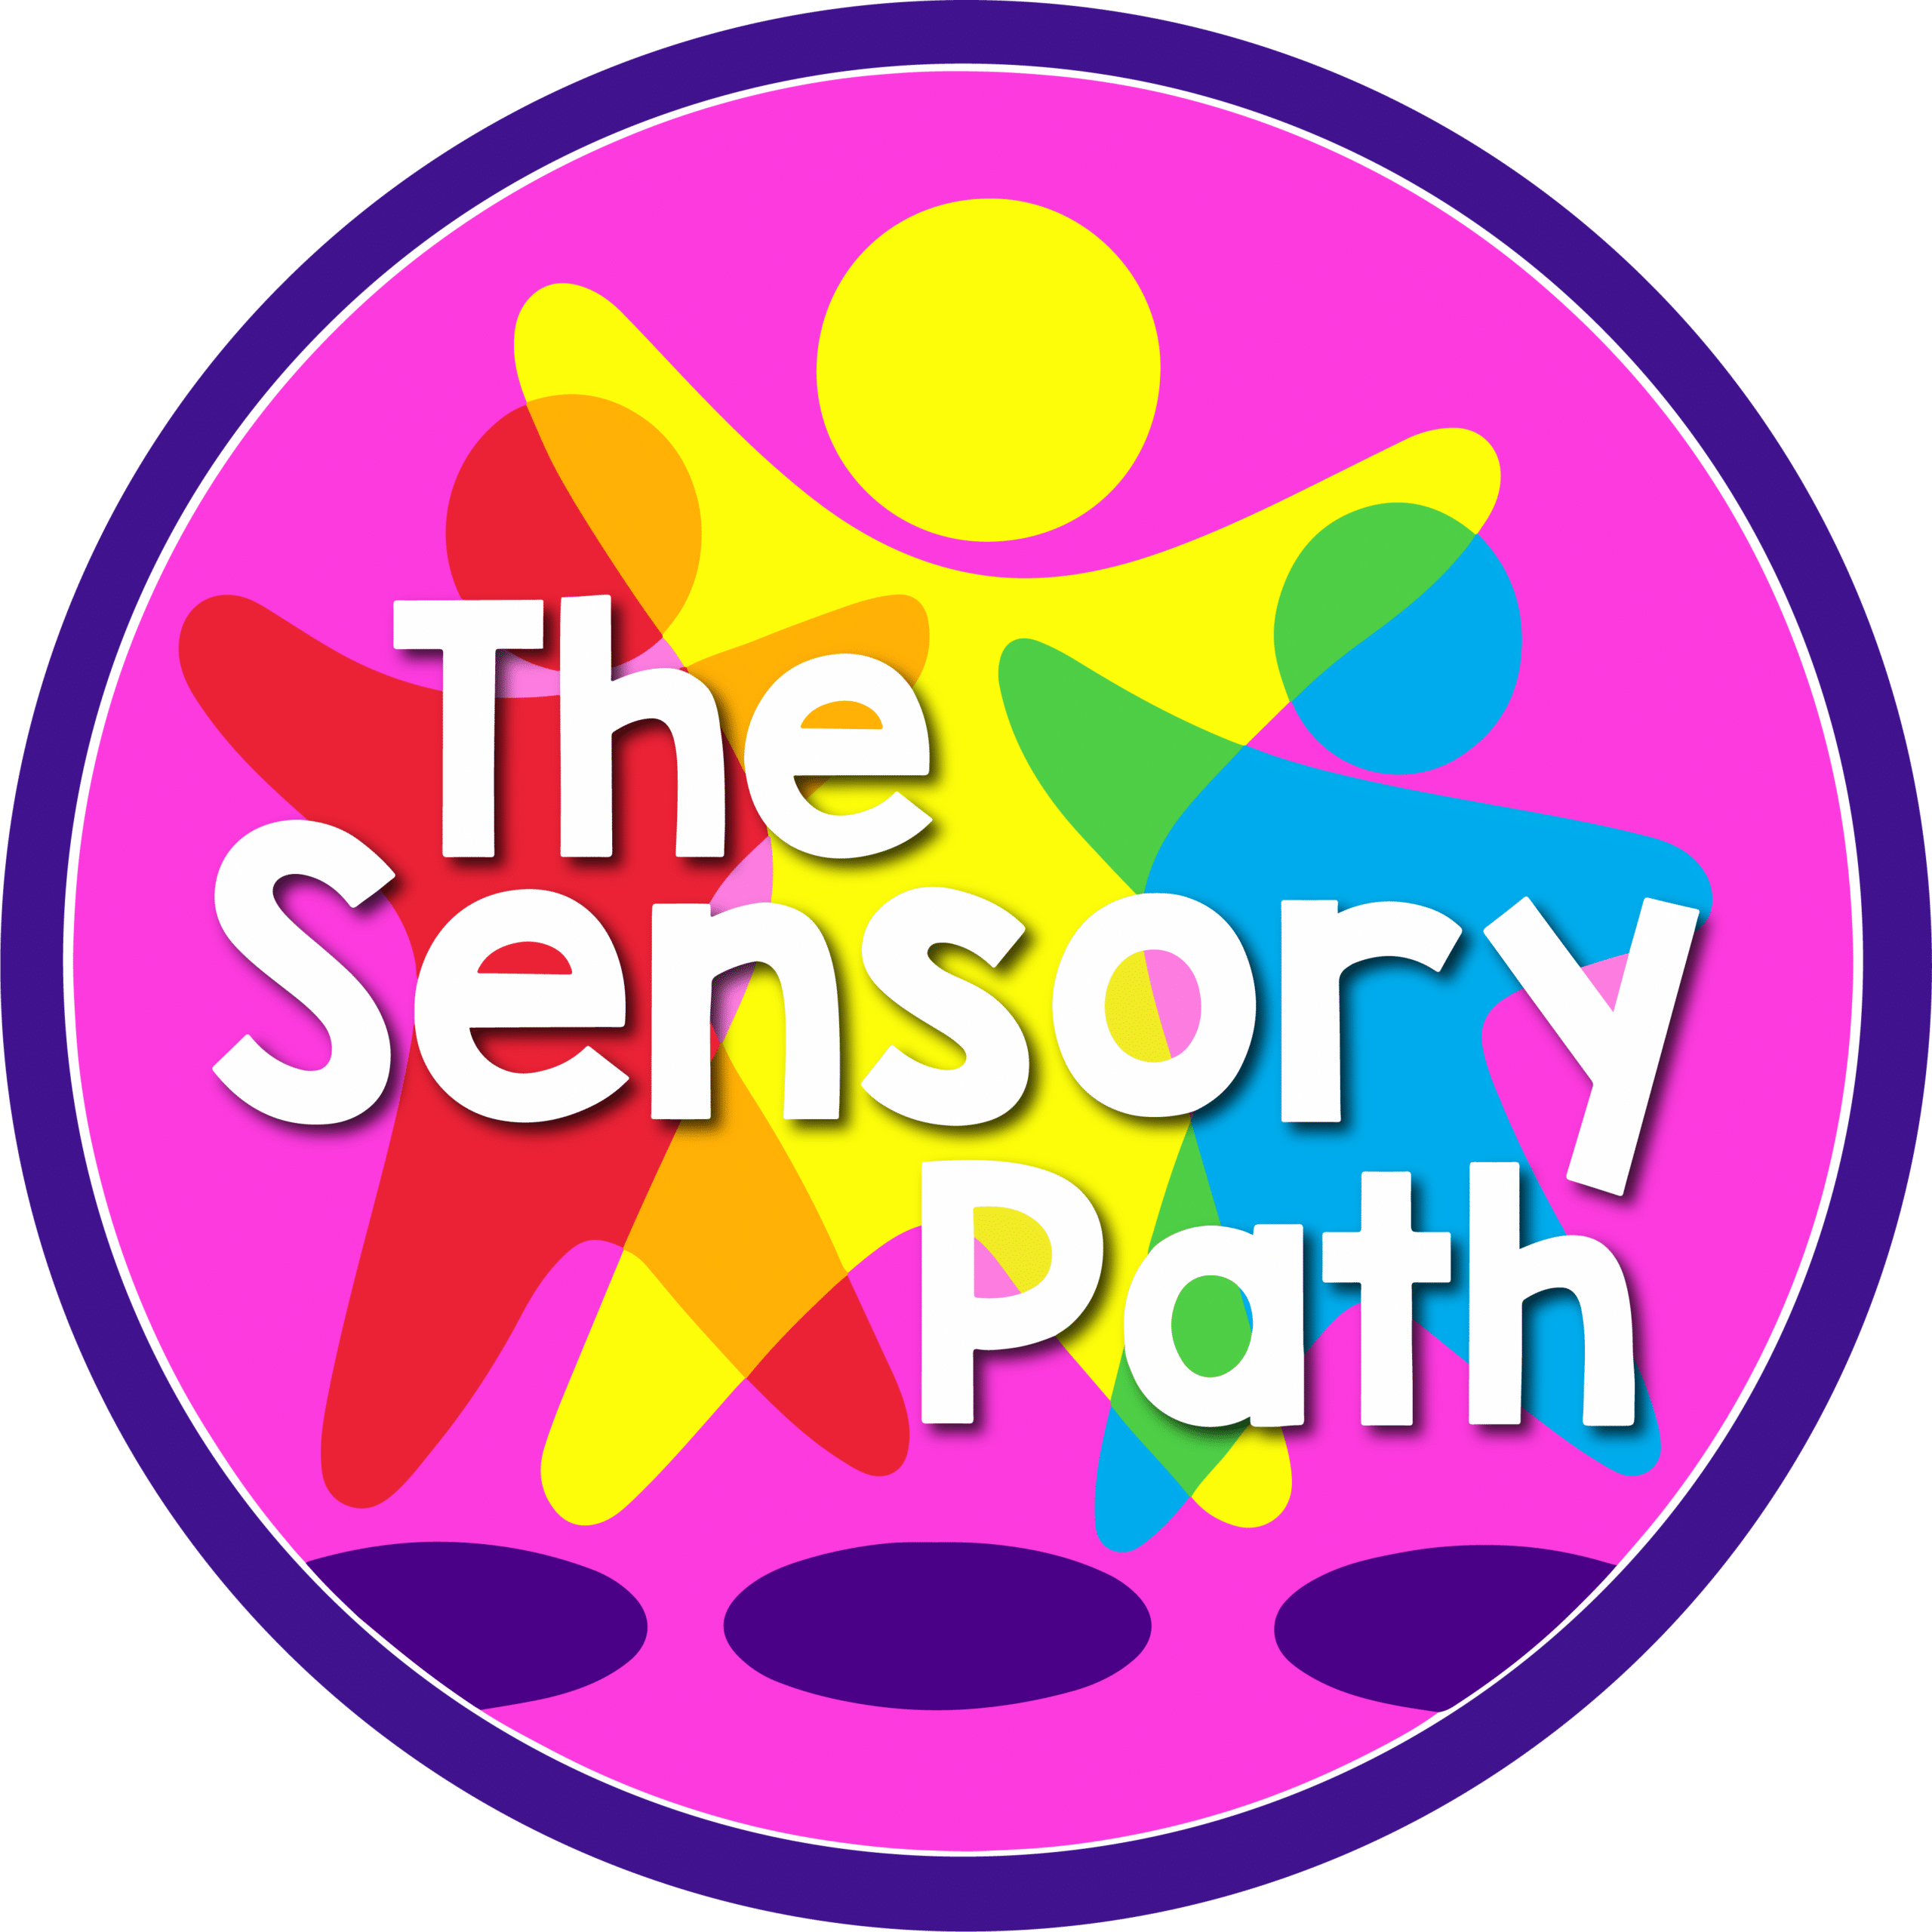 Sensory Pathways! What the heck are those?